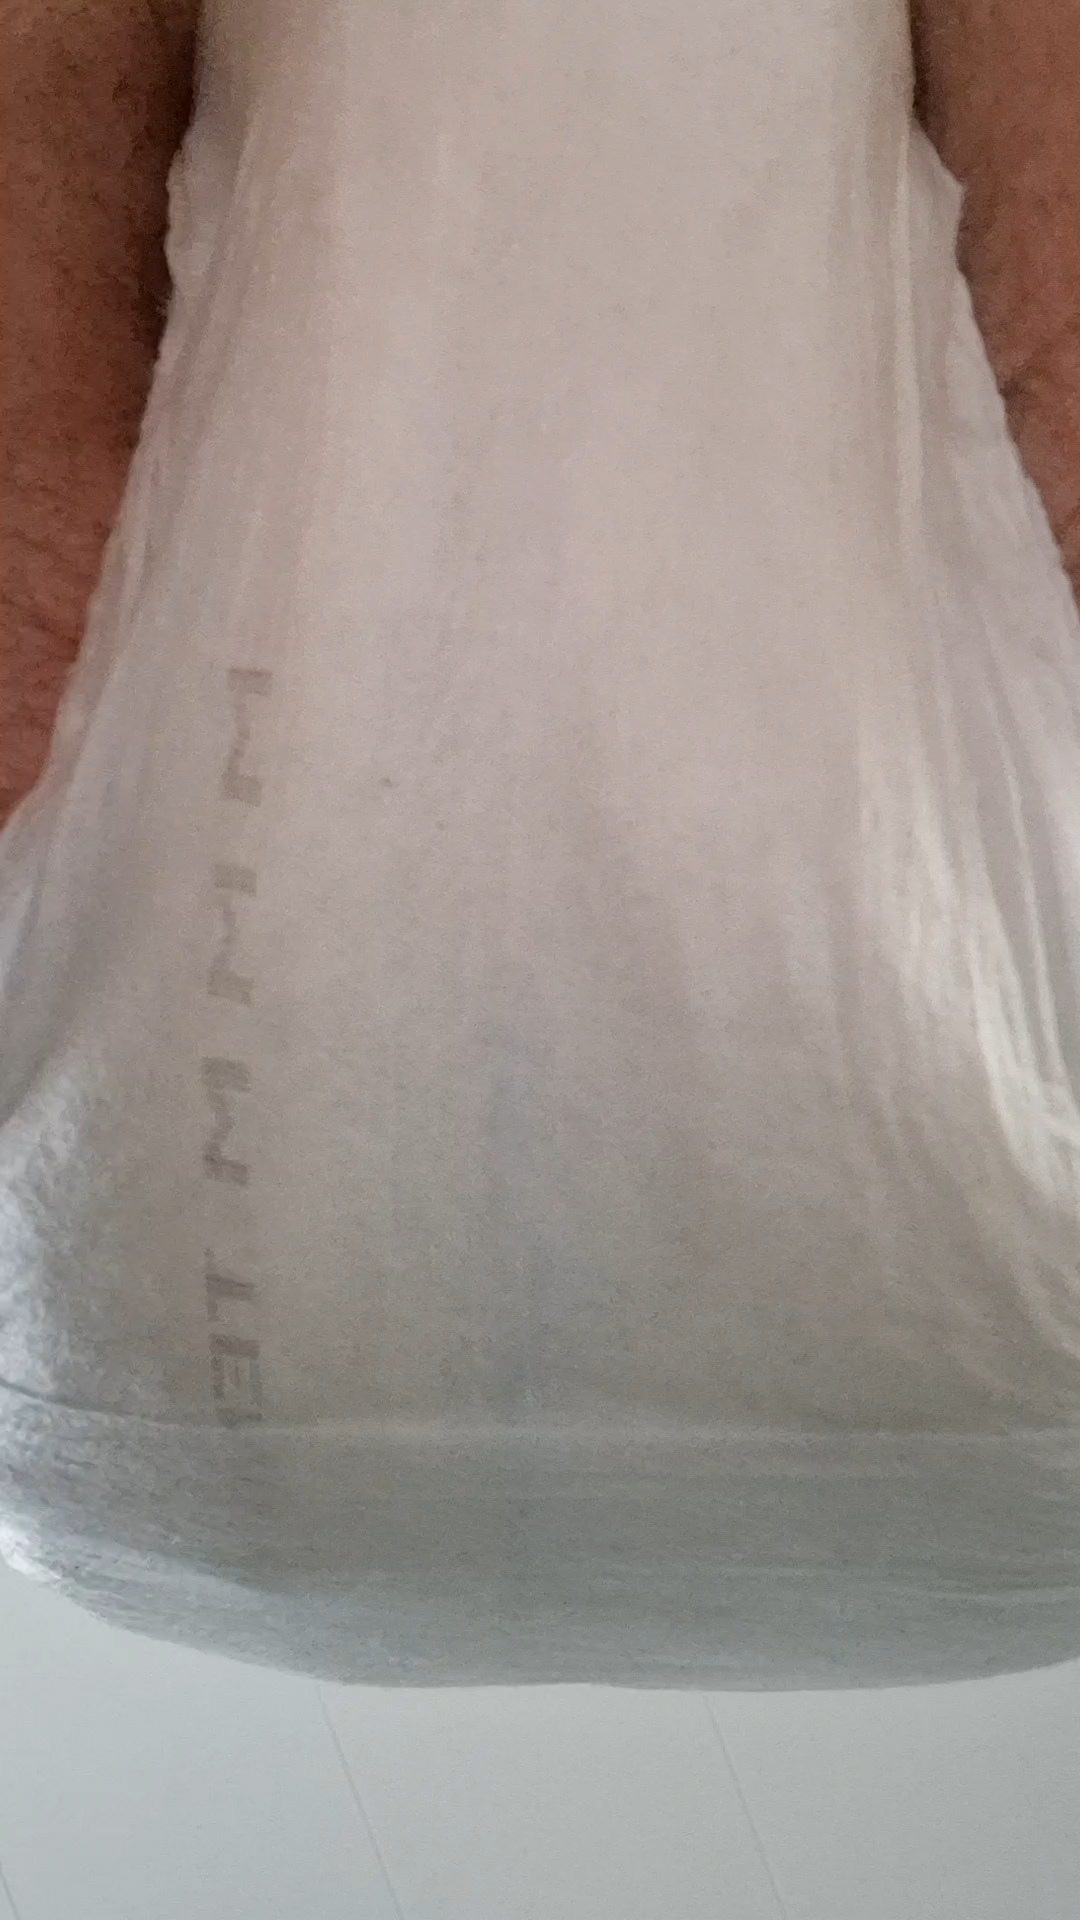 Pooping my already wet diaper - video 2